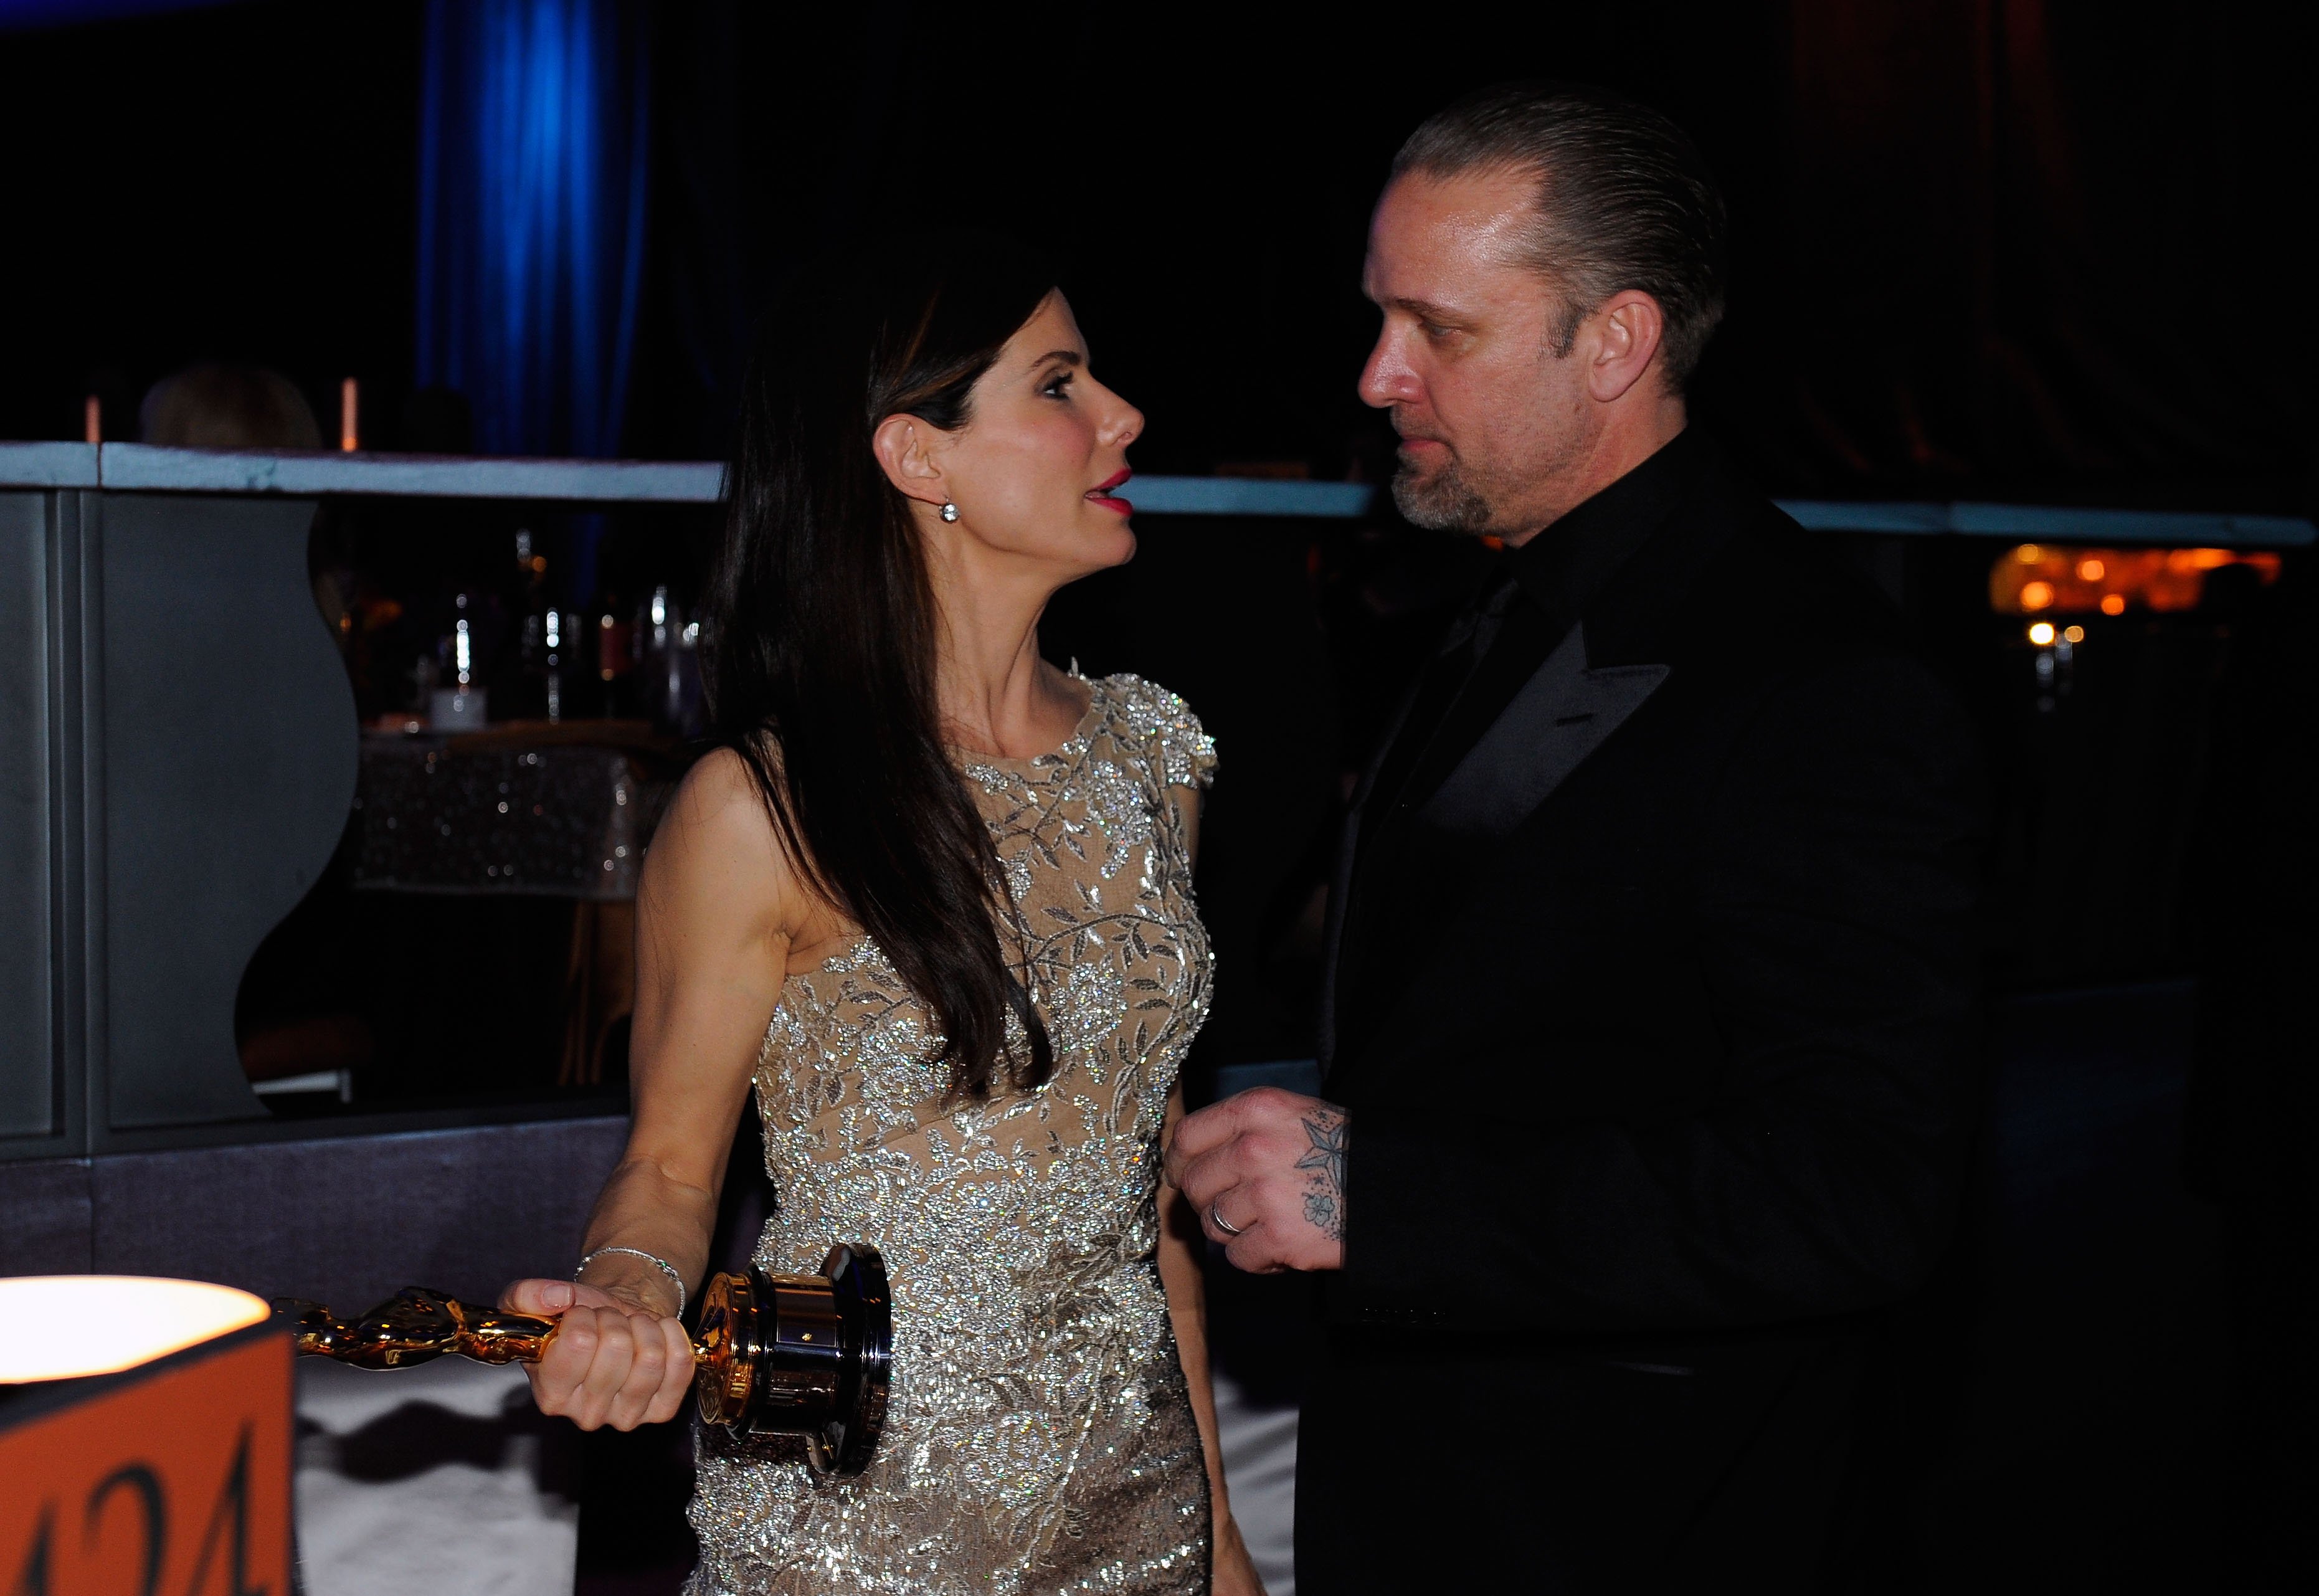 Sandra Bullock, winner Best Actress award for the film "The Blind Side," pictured with Jesse James during the 82nd Annual Academy Awards Governor's Ball at Kodak Theatre on March 7, 2010 in Hollywood, California. / Source: Getty Images